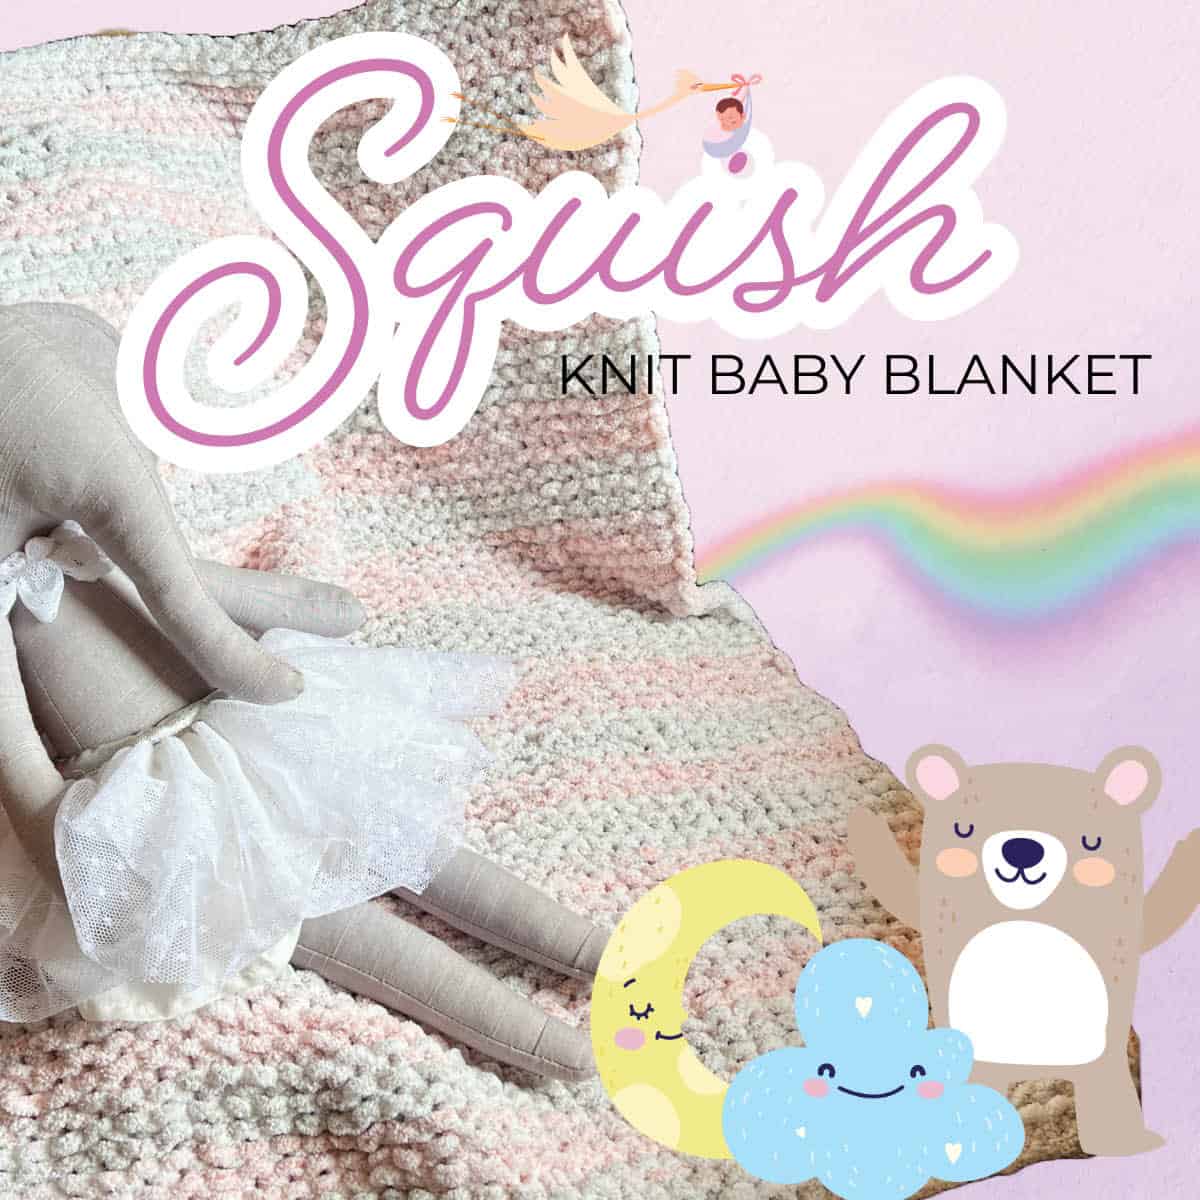 Squish Knit Baby Blanket with Tutorial